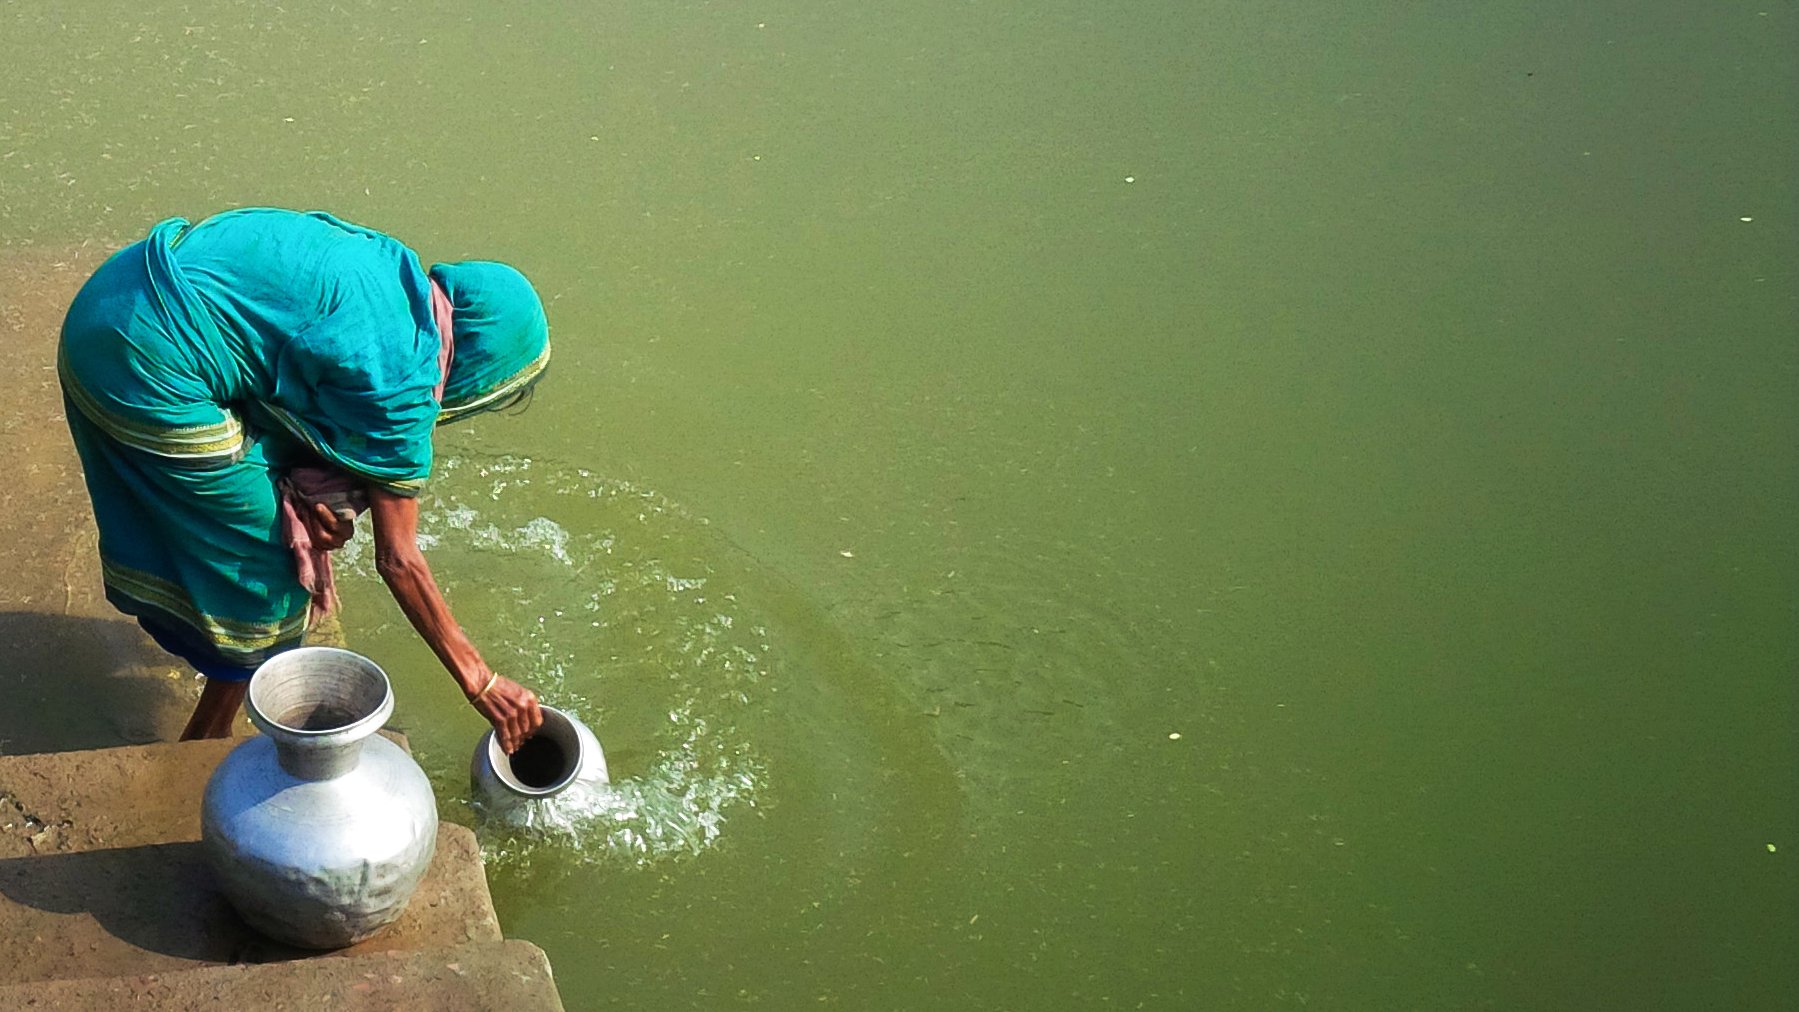 A woman collecting water in Bangladesh